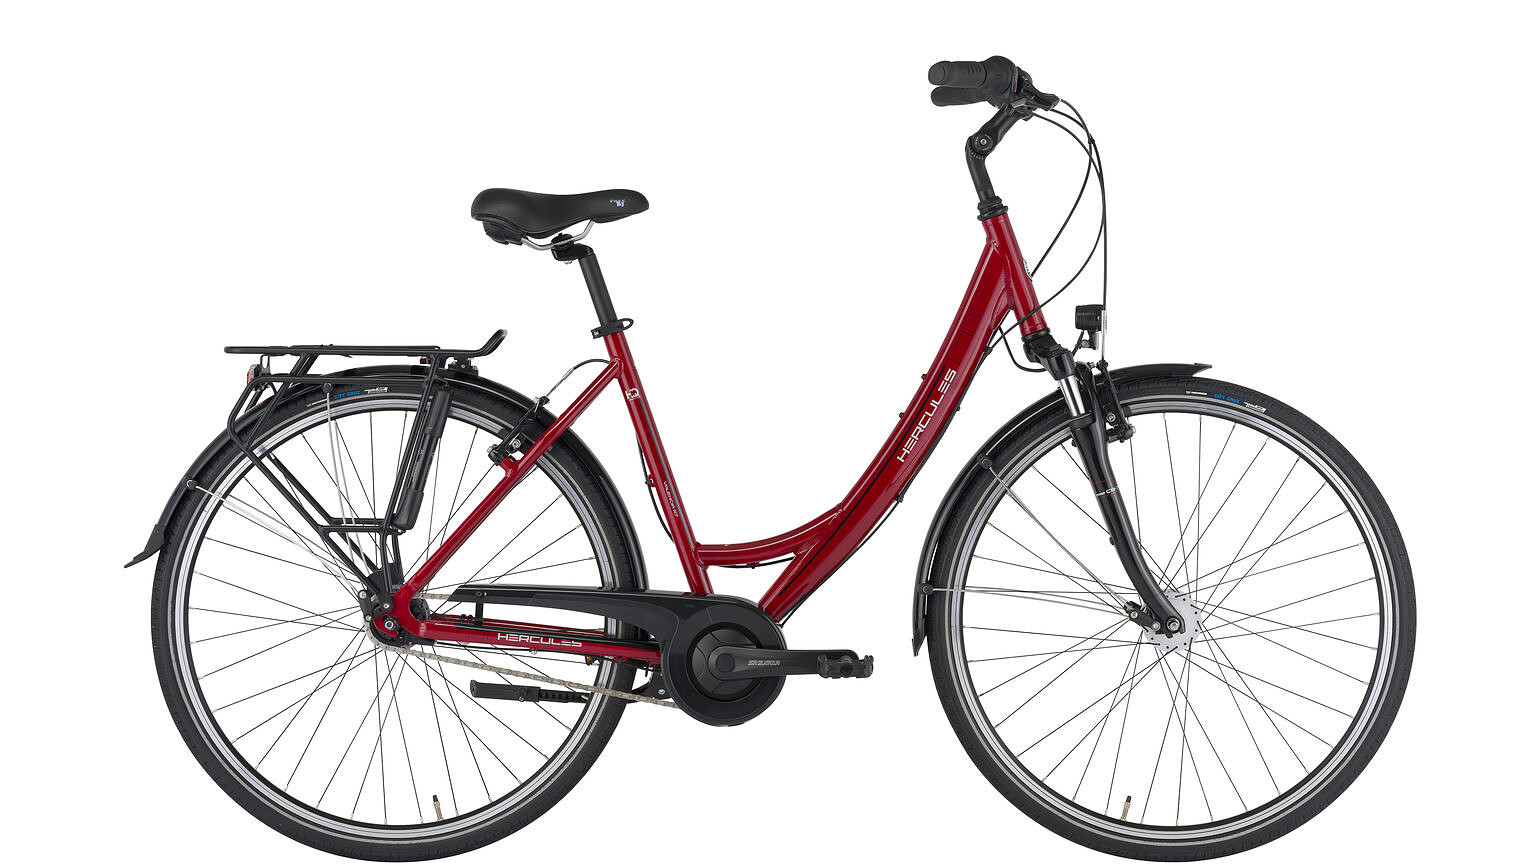 Hercules stadsfiets Valencia R7 Dames Rood 51 cm Rood